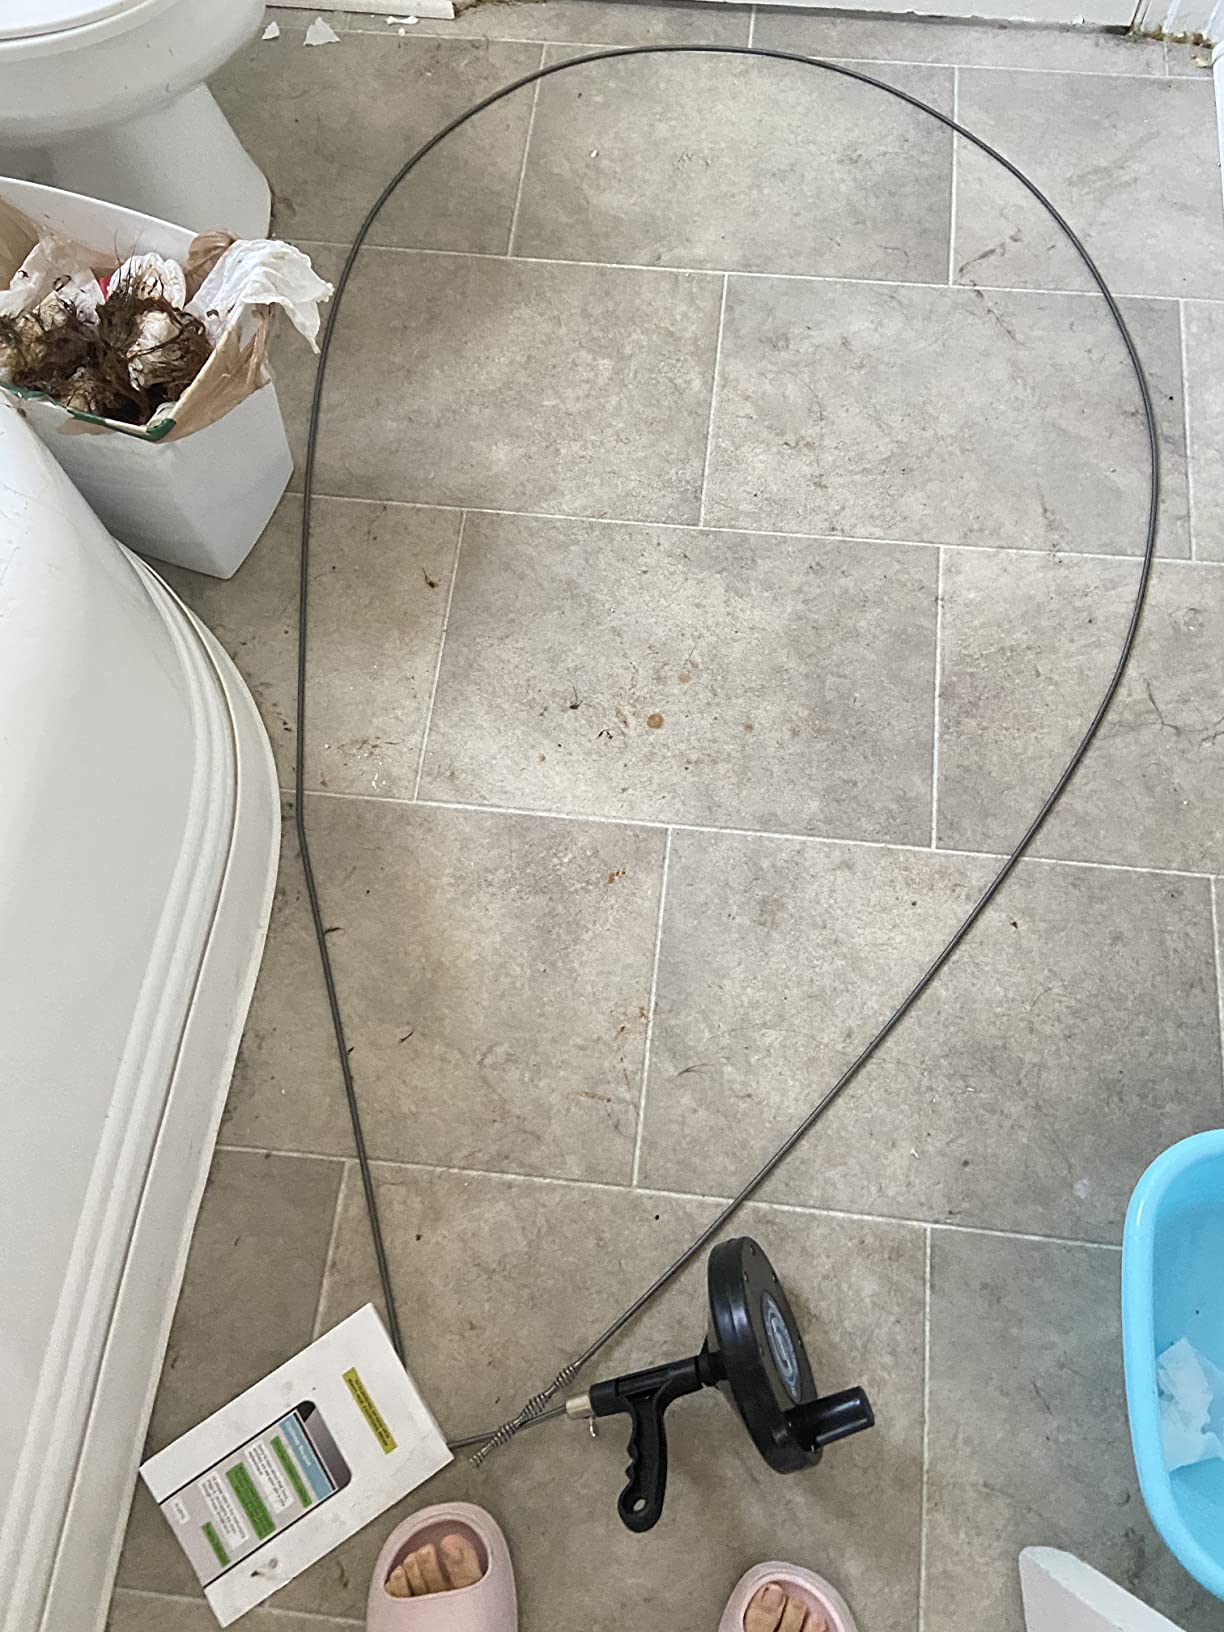 Drain Auger for Bathroom, Kitchen & Toilet - Plumbing Snake Cleaner photo review